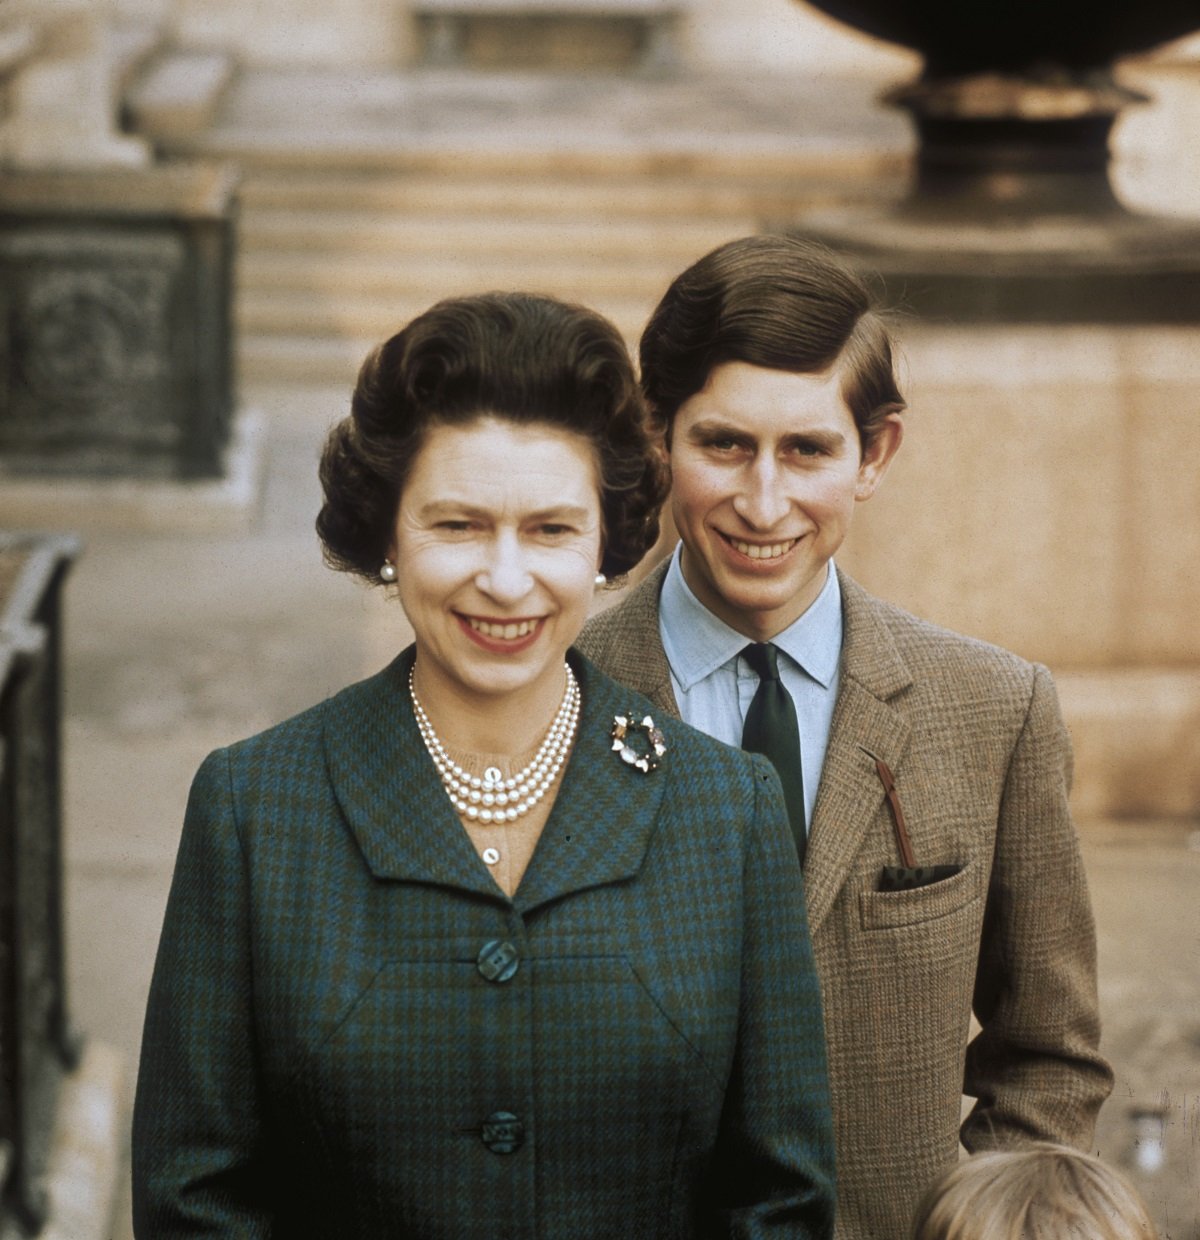 Queen Elizabeth II and Prince Charles in Windsor, UK, in April 1969 | Source: Getty Image